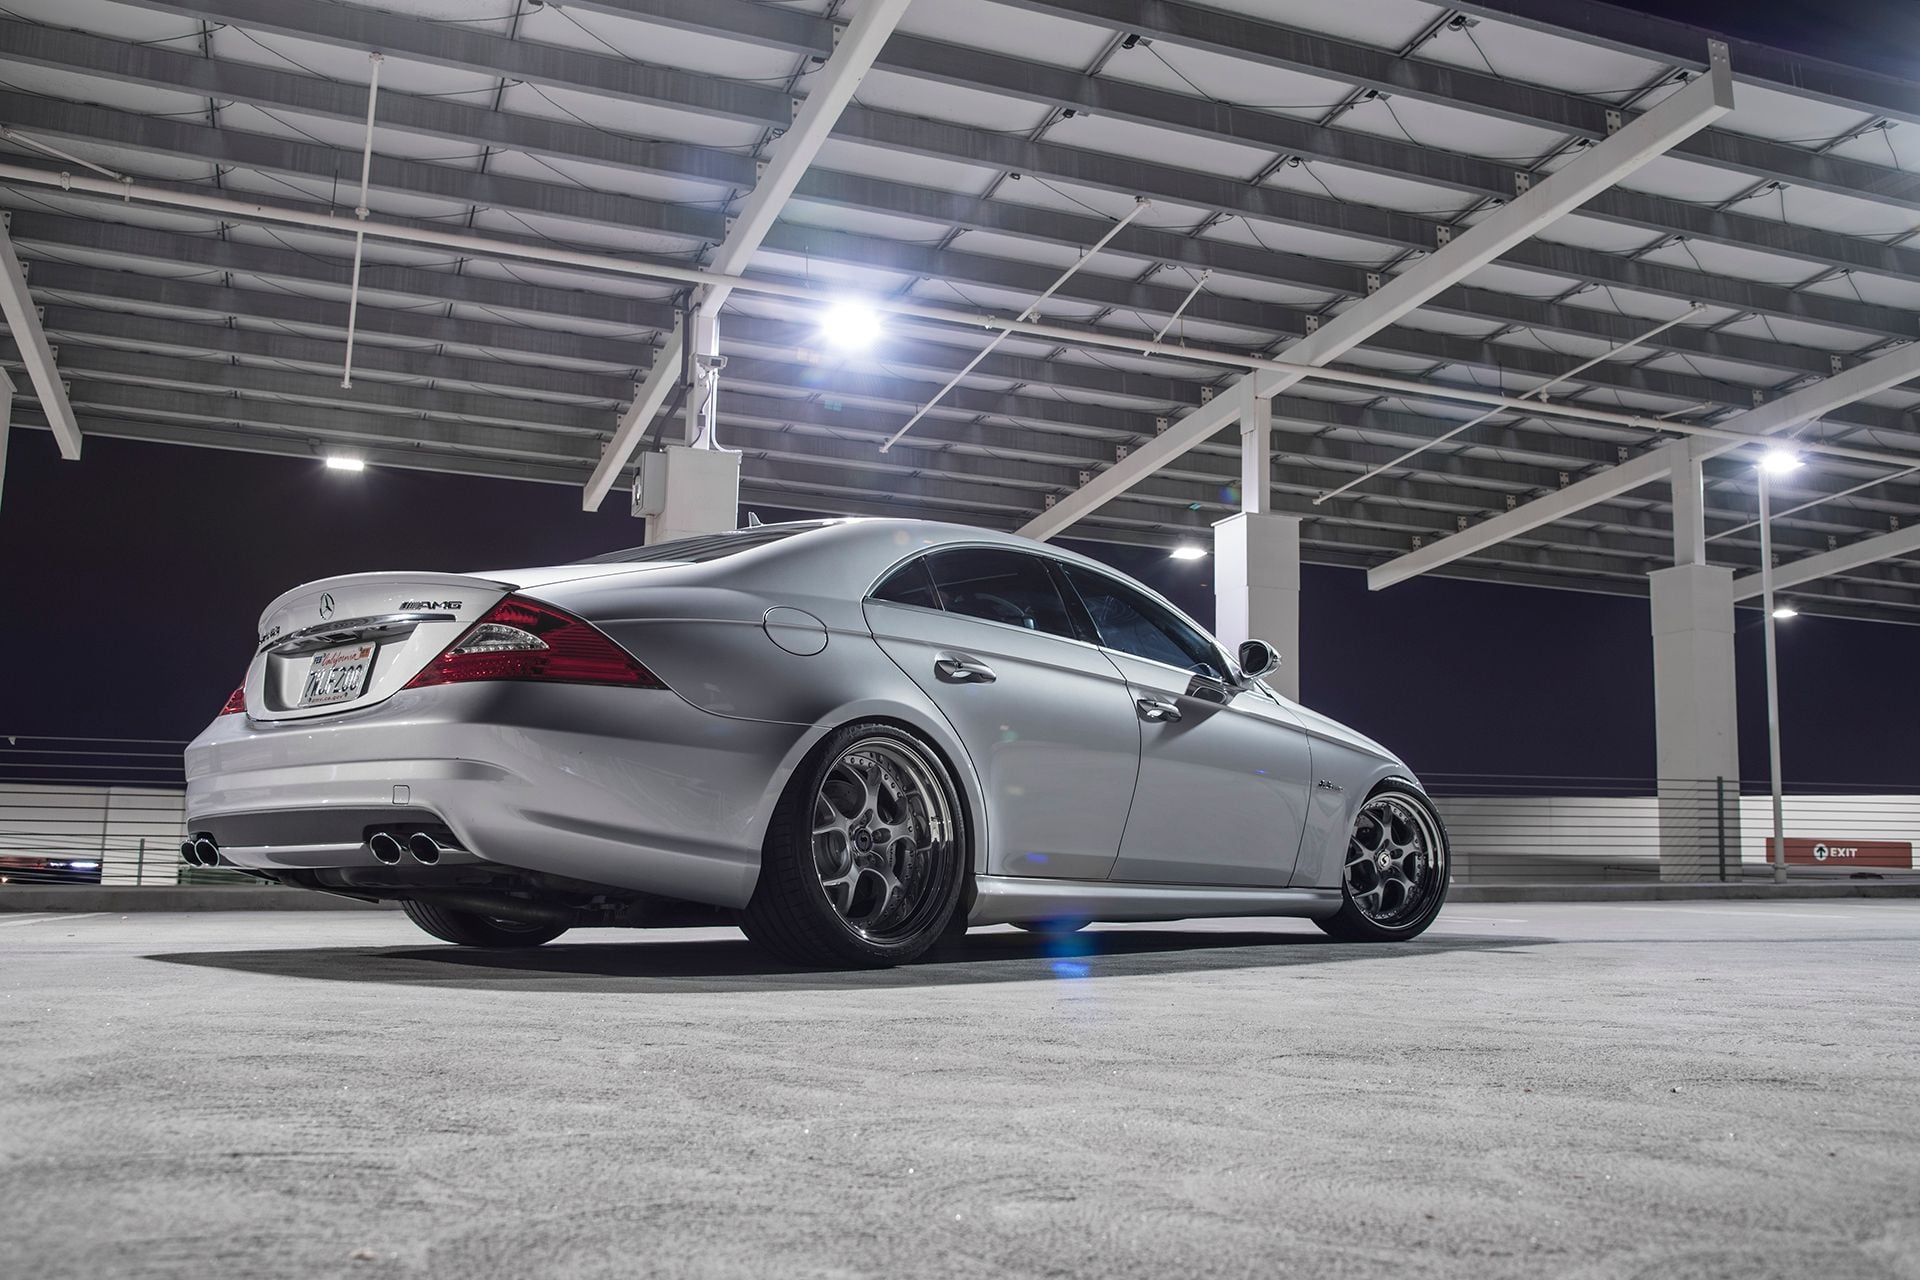 2008 Mercedes-Benz CLS63 AMG - 2008 CLS63 Factory P030 and Factory Carbon Fiber Interior $20K in Tasteful Mods - Used - VIN WDDDJ77X18A125112 - 57,000 Miles - 8 cyl - 2WD - Automatic - Sedan - Silver - Irvine, CA 92602, United States